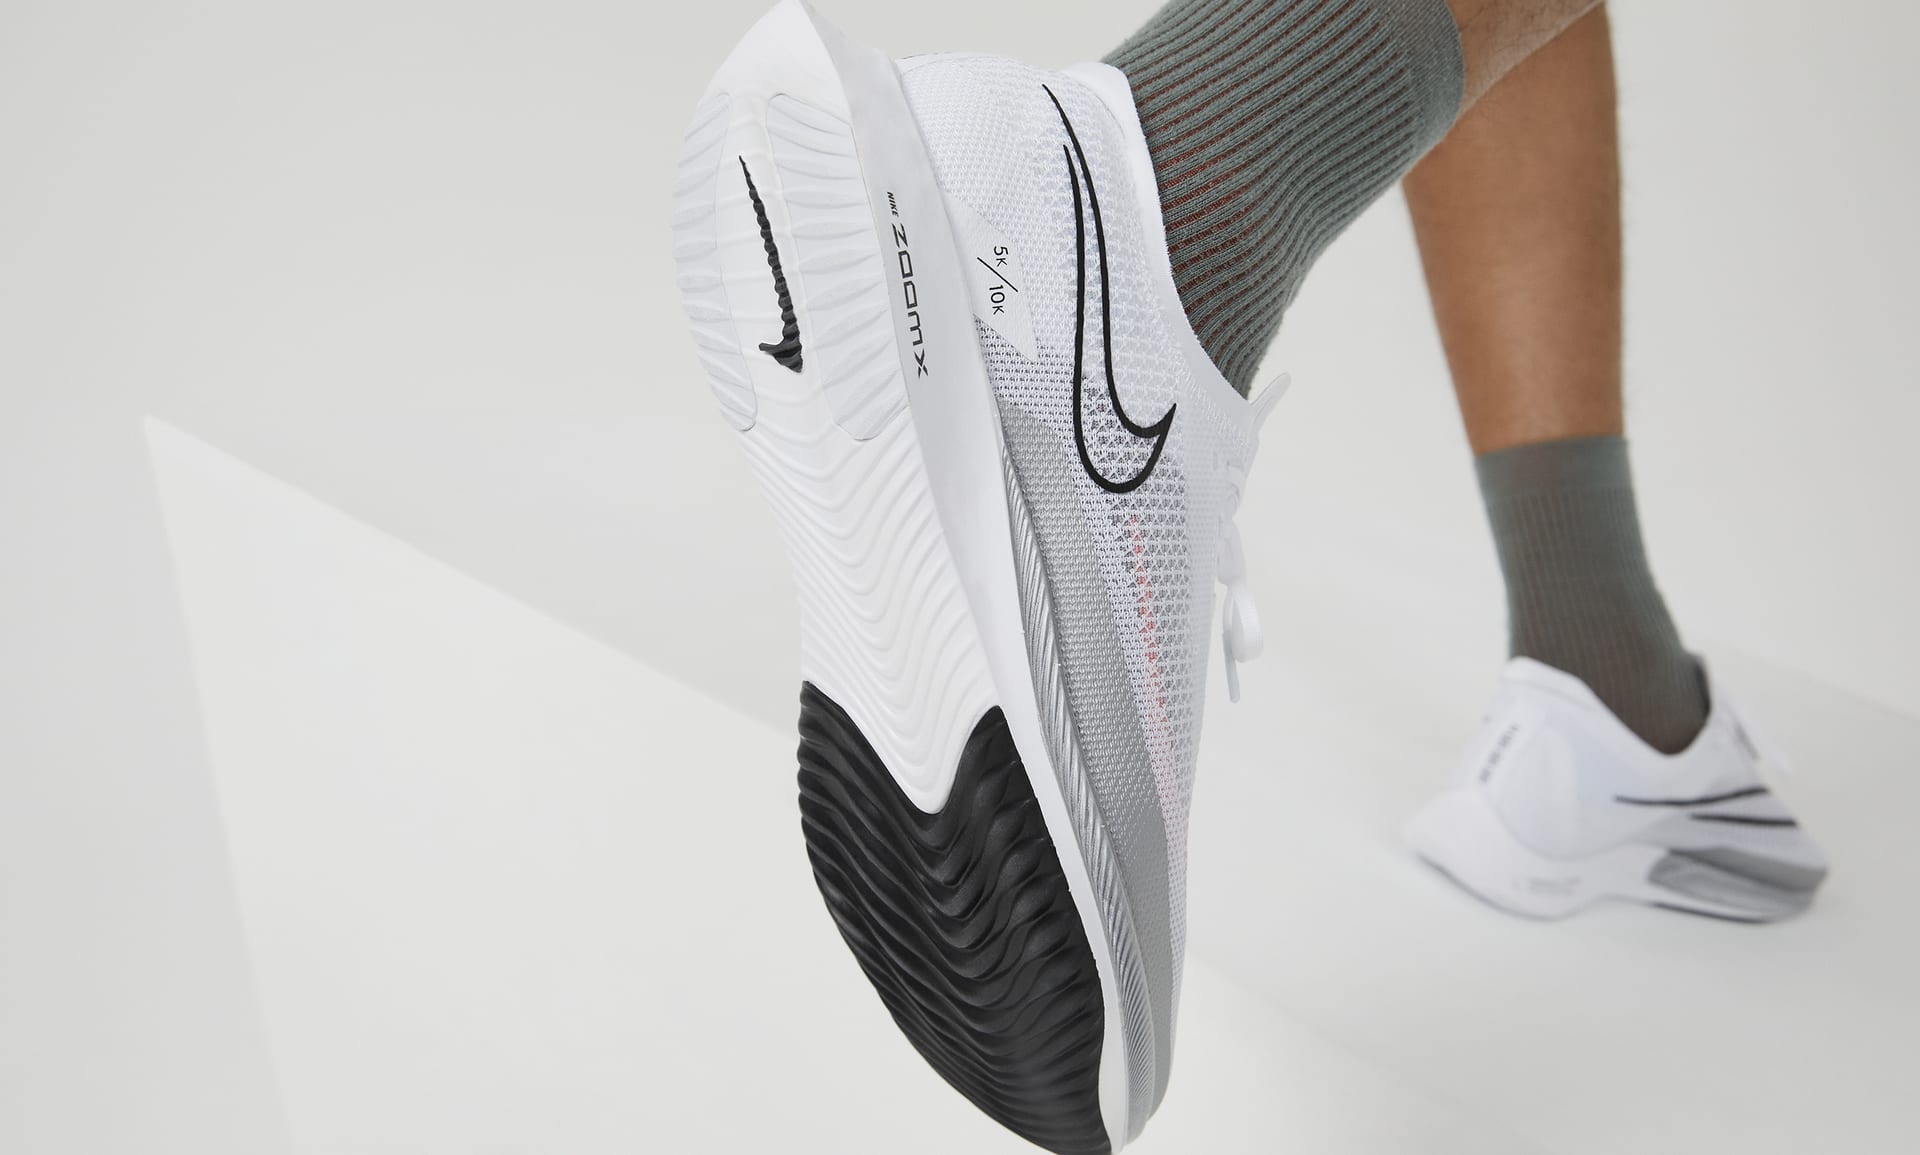 Chaussures de running Nike ZoomX Streakfly - Nike - Homme - Entretien  physique